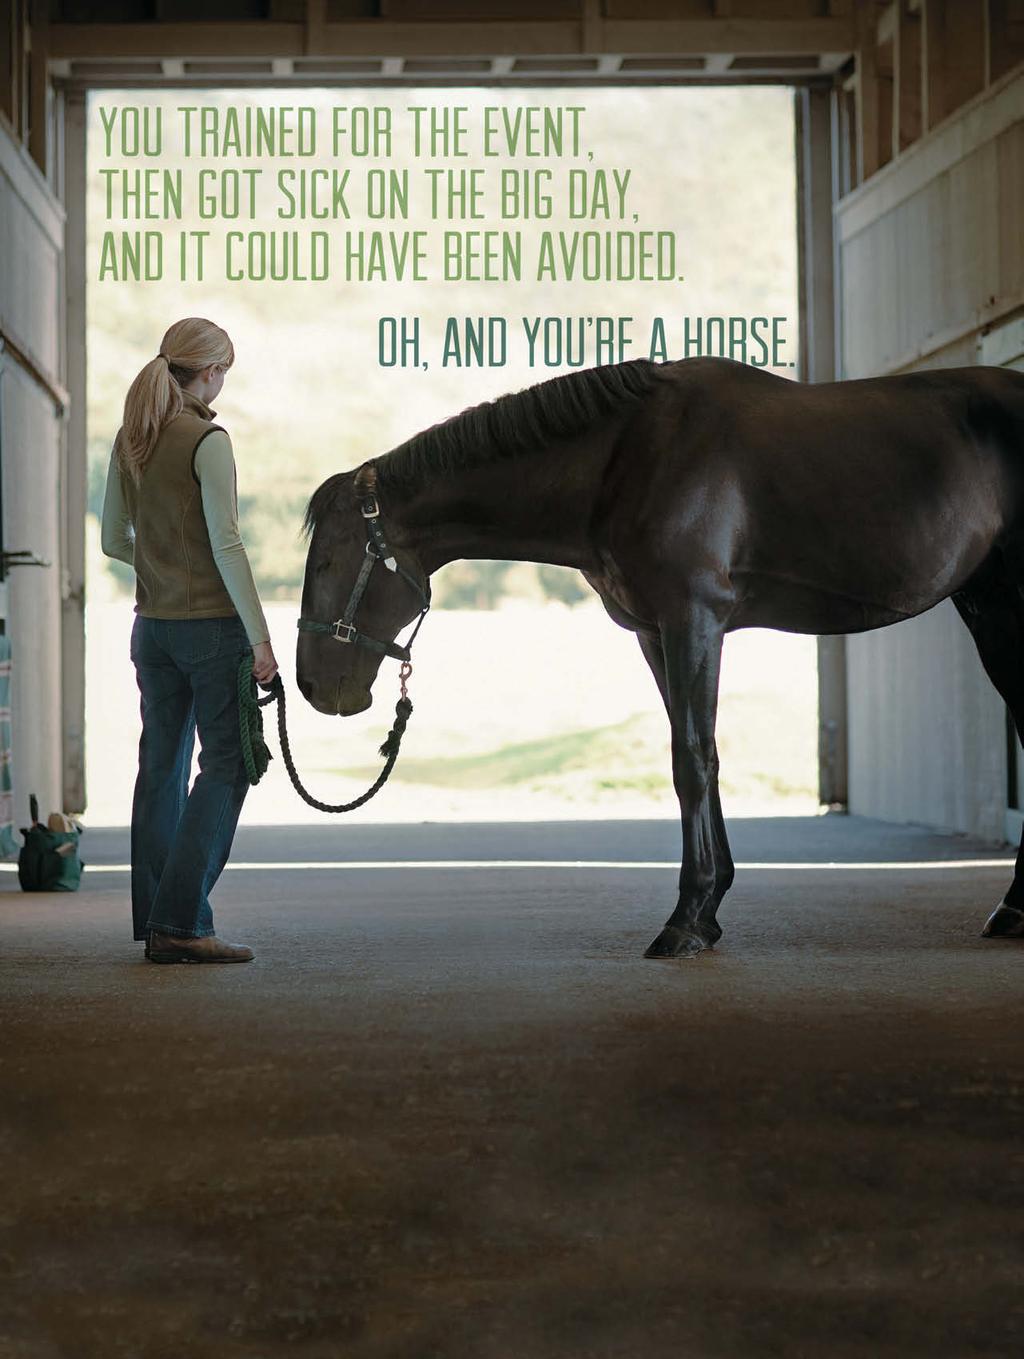 Competitions. Trailering. Breeding. Weaning. Your horse could use some help avoiding illness during stressful situations.